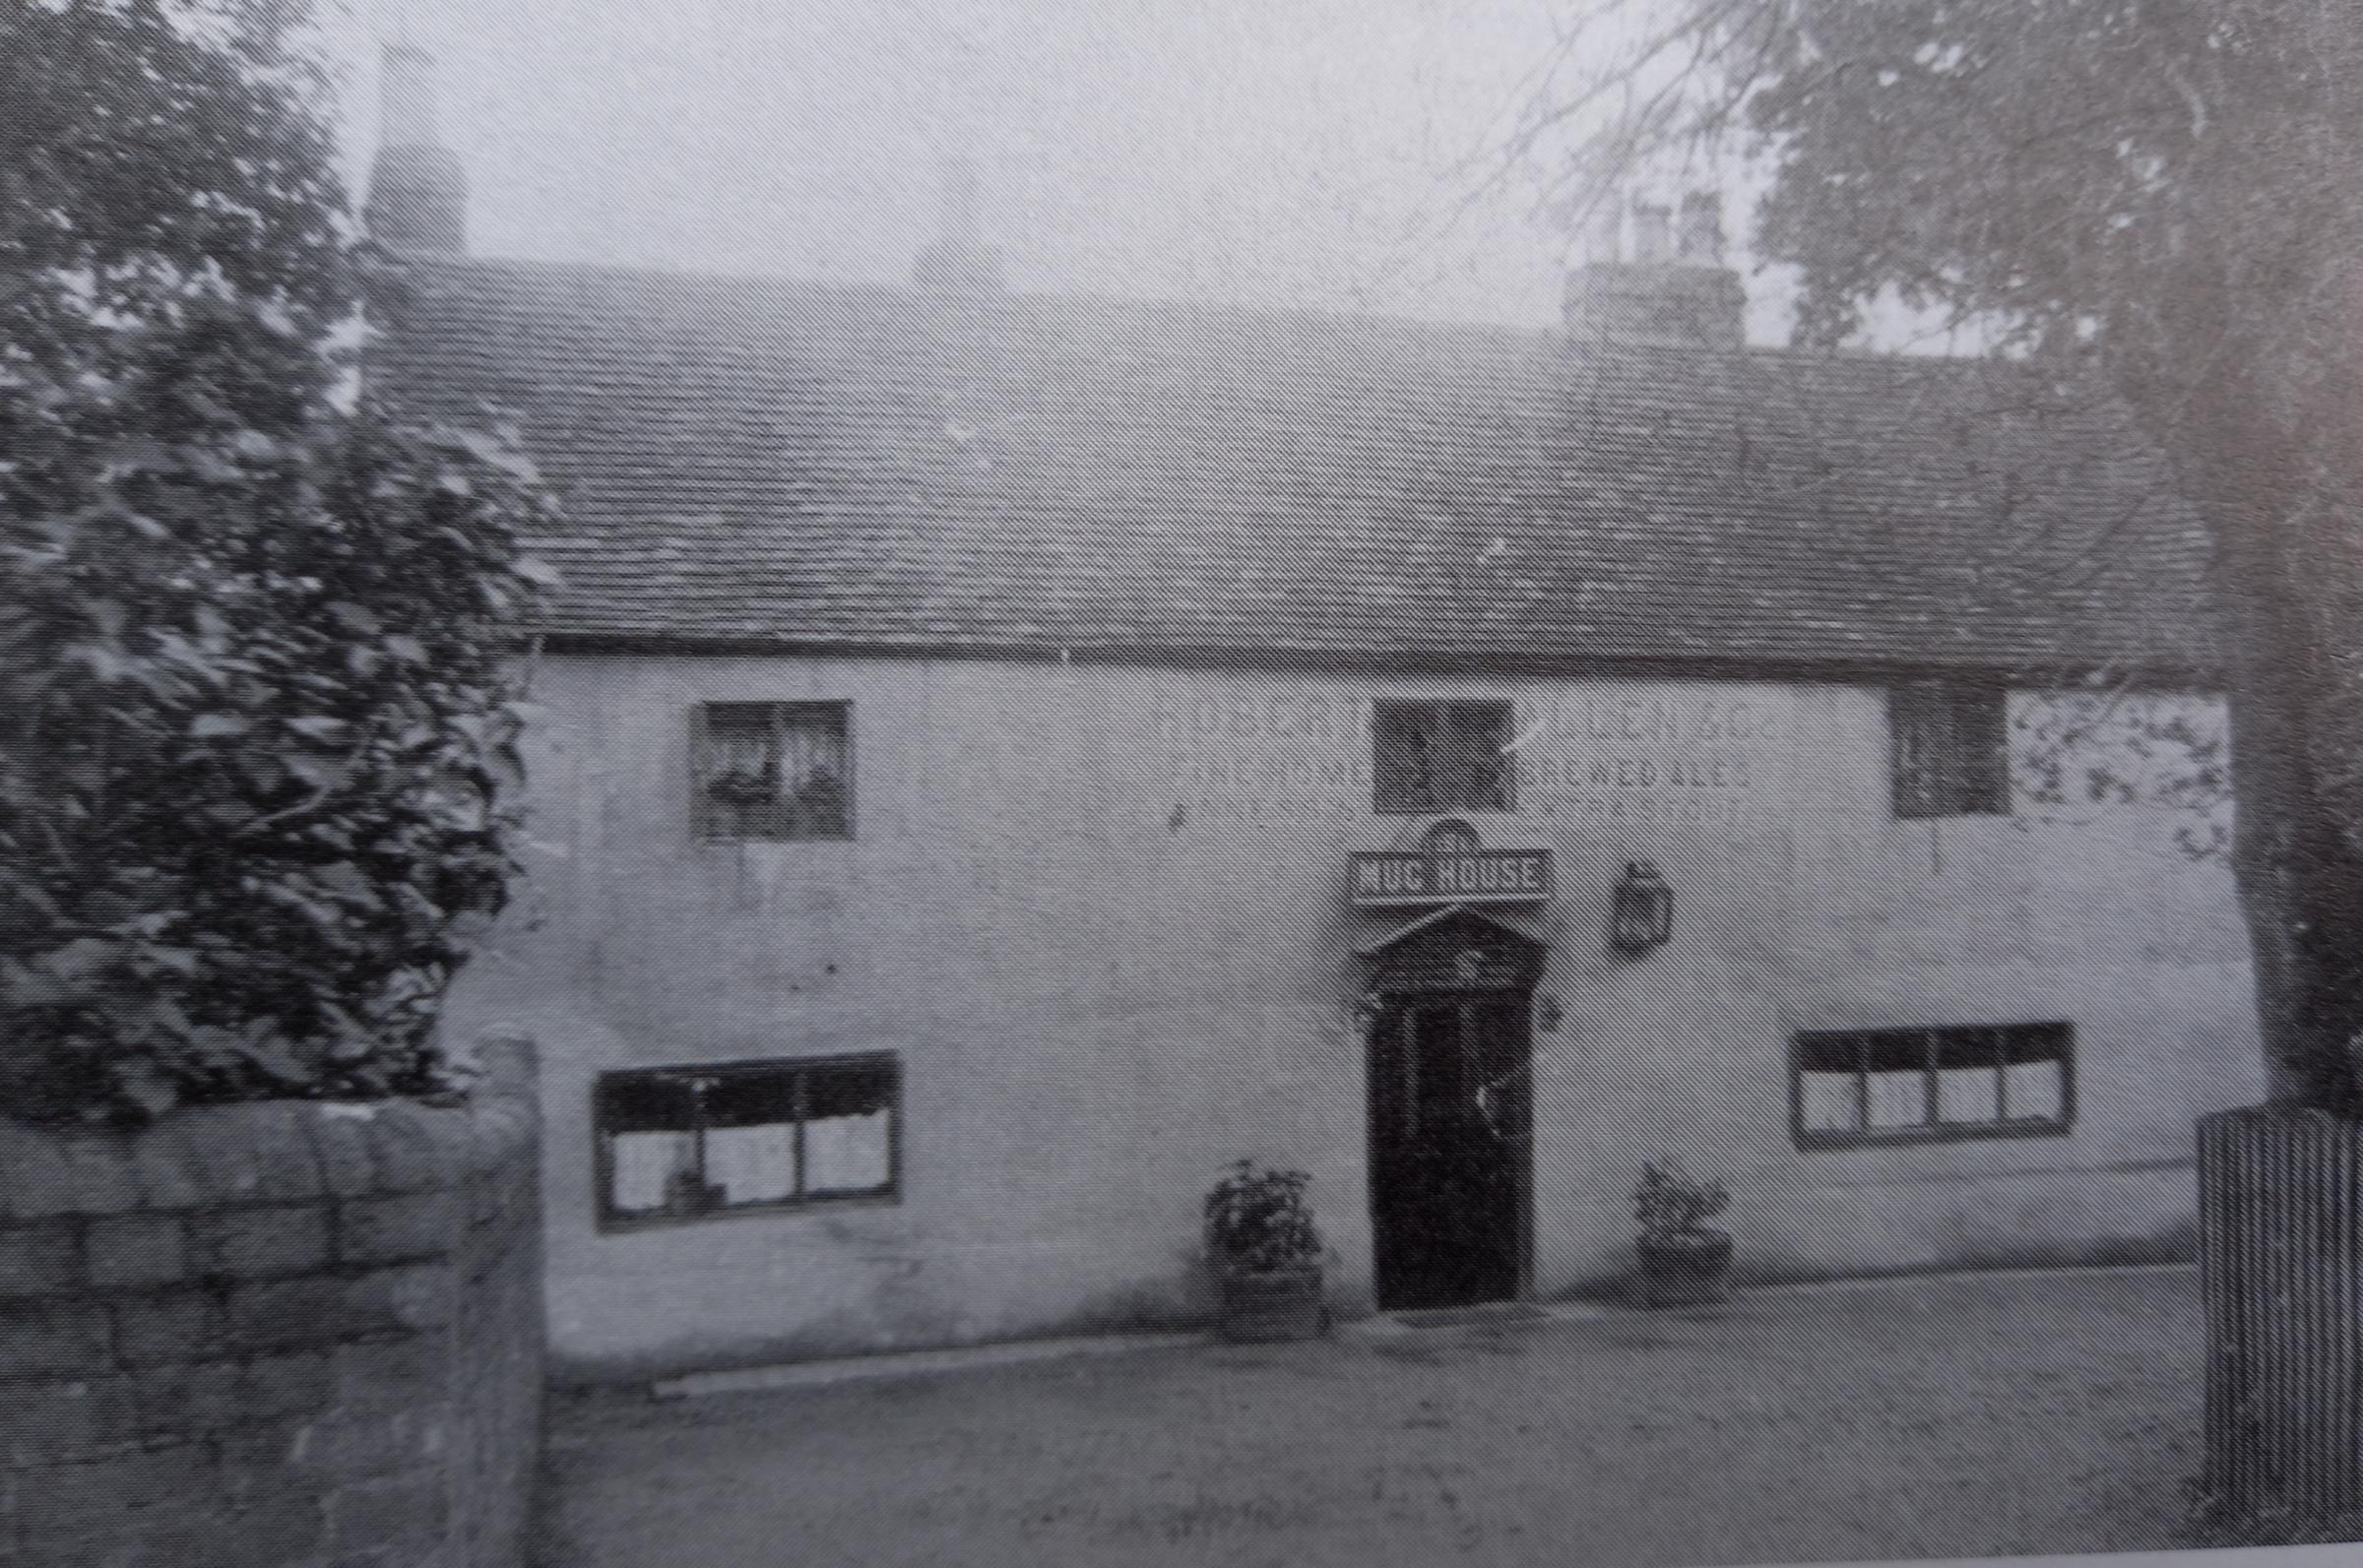 The Mug House at Claines pictured during the tenure of licensee Albert Beck, sometime between 1905 and 1911. Photo courtesy Friends of Claines Church